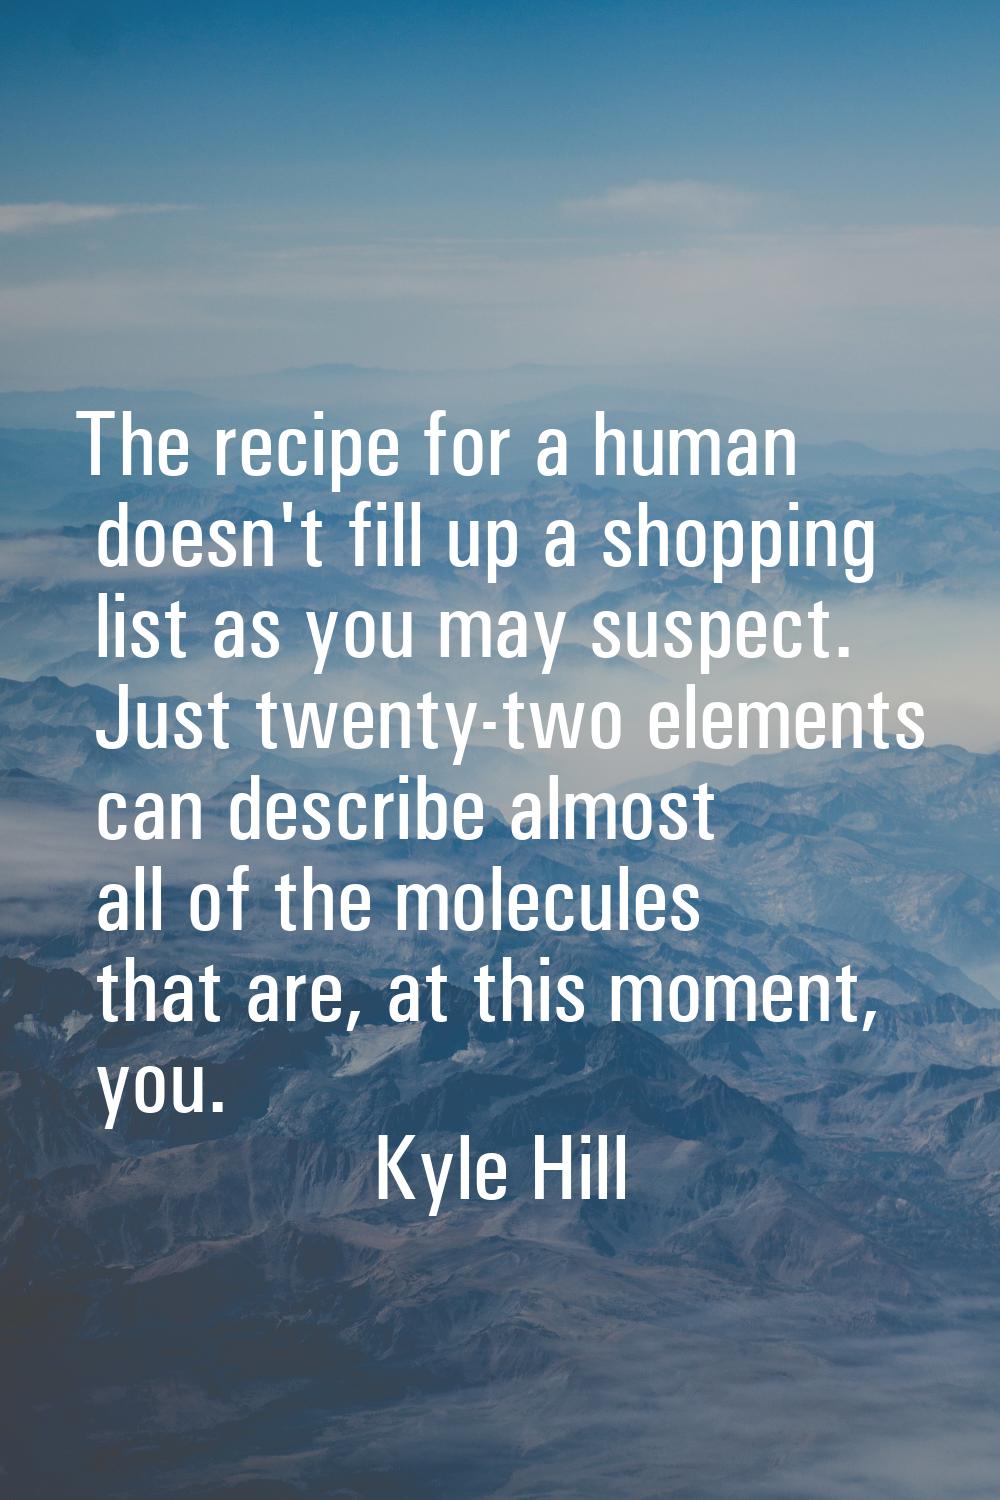 The recipe for a human doesn't fill up a shopping list as you may suspect. Just twenty-two elements